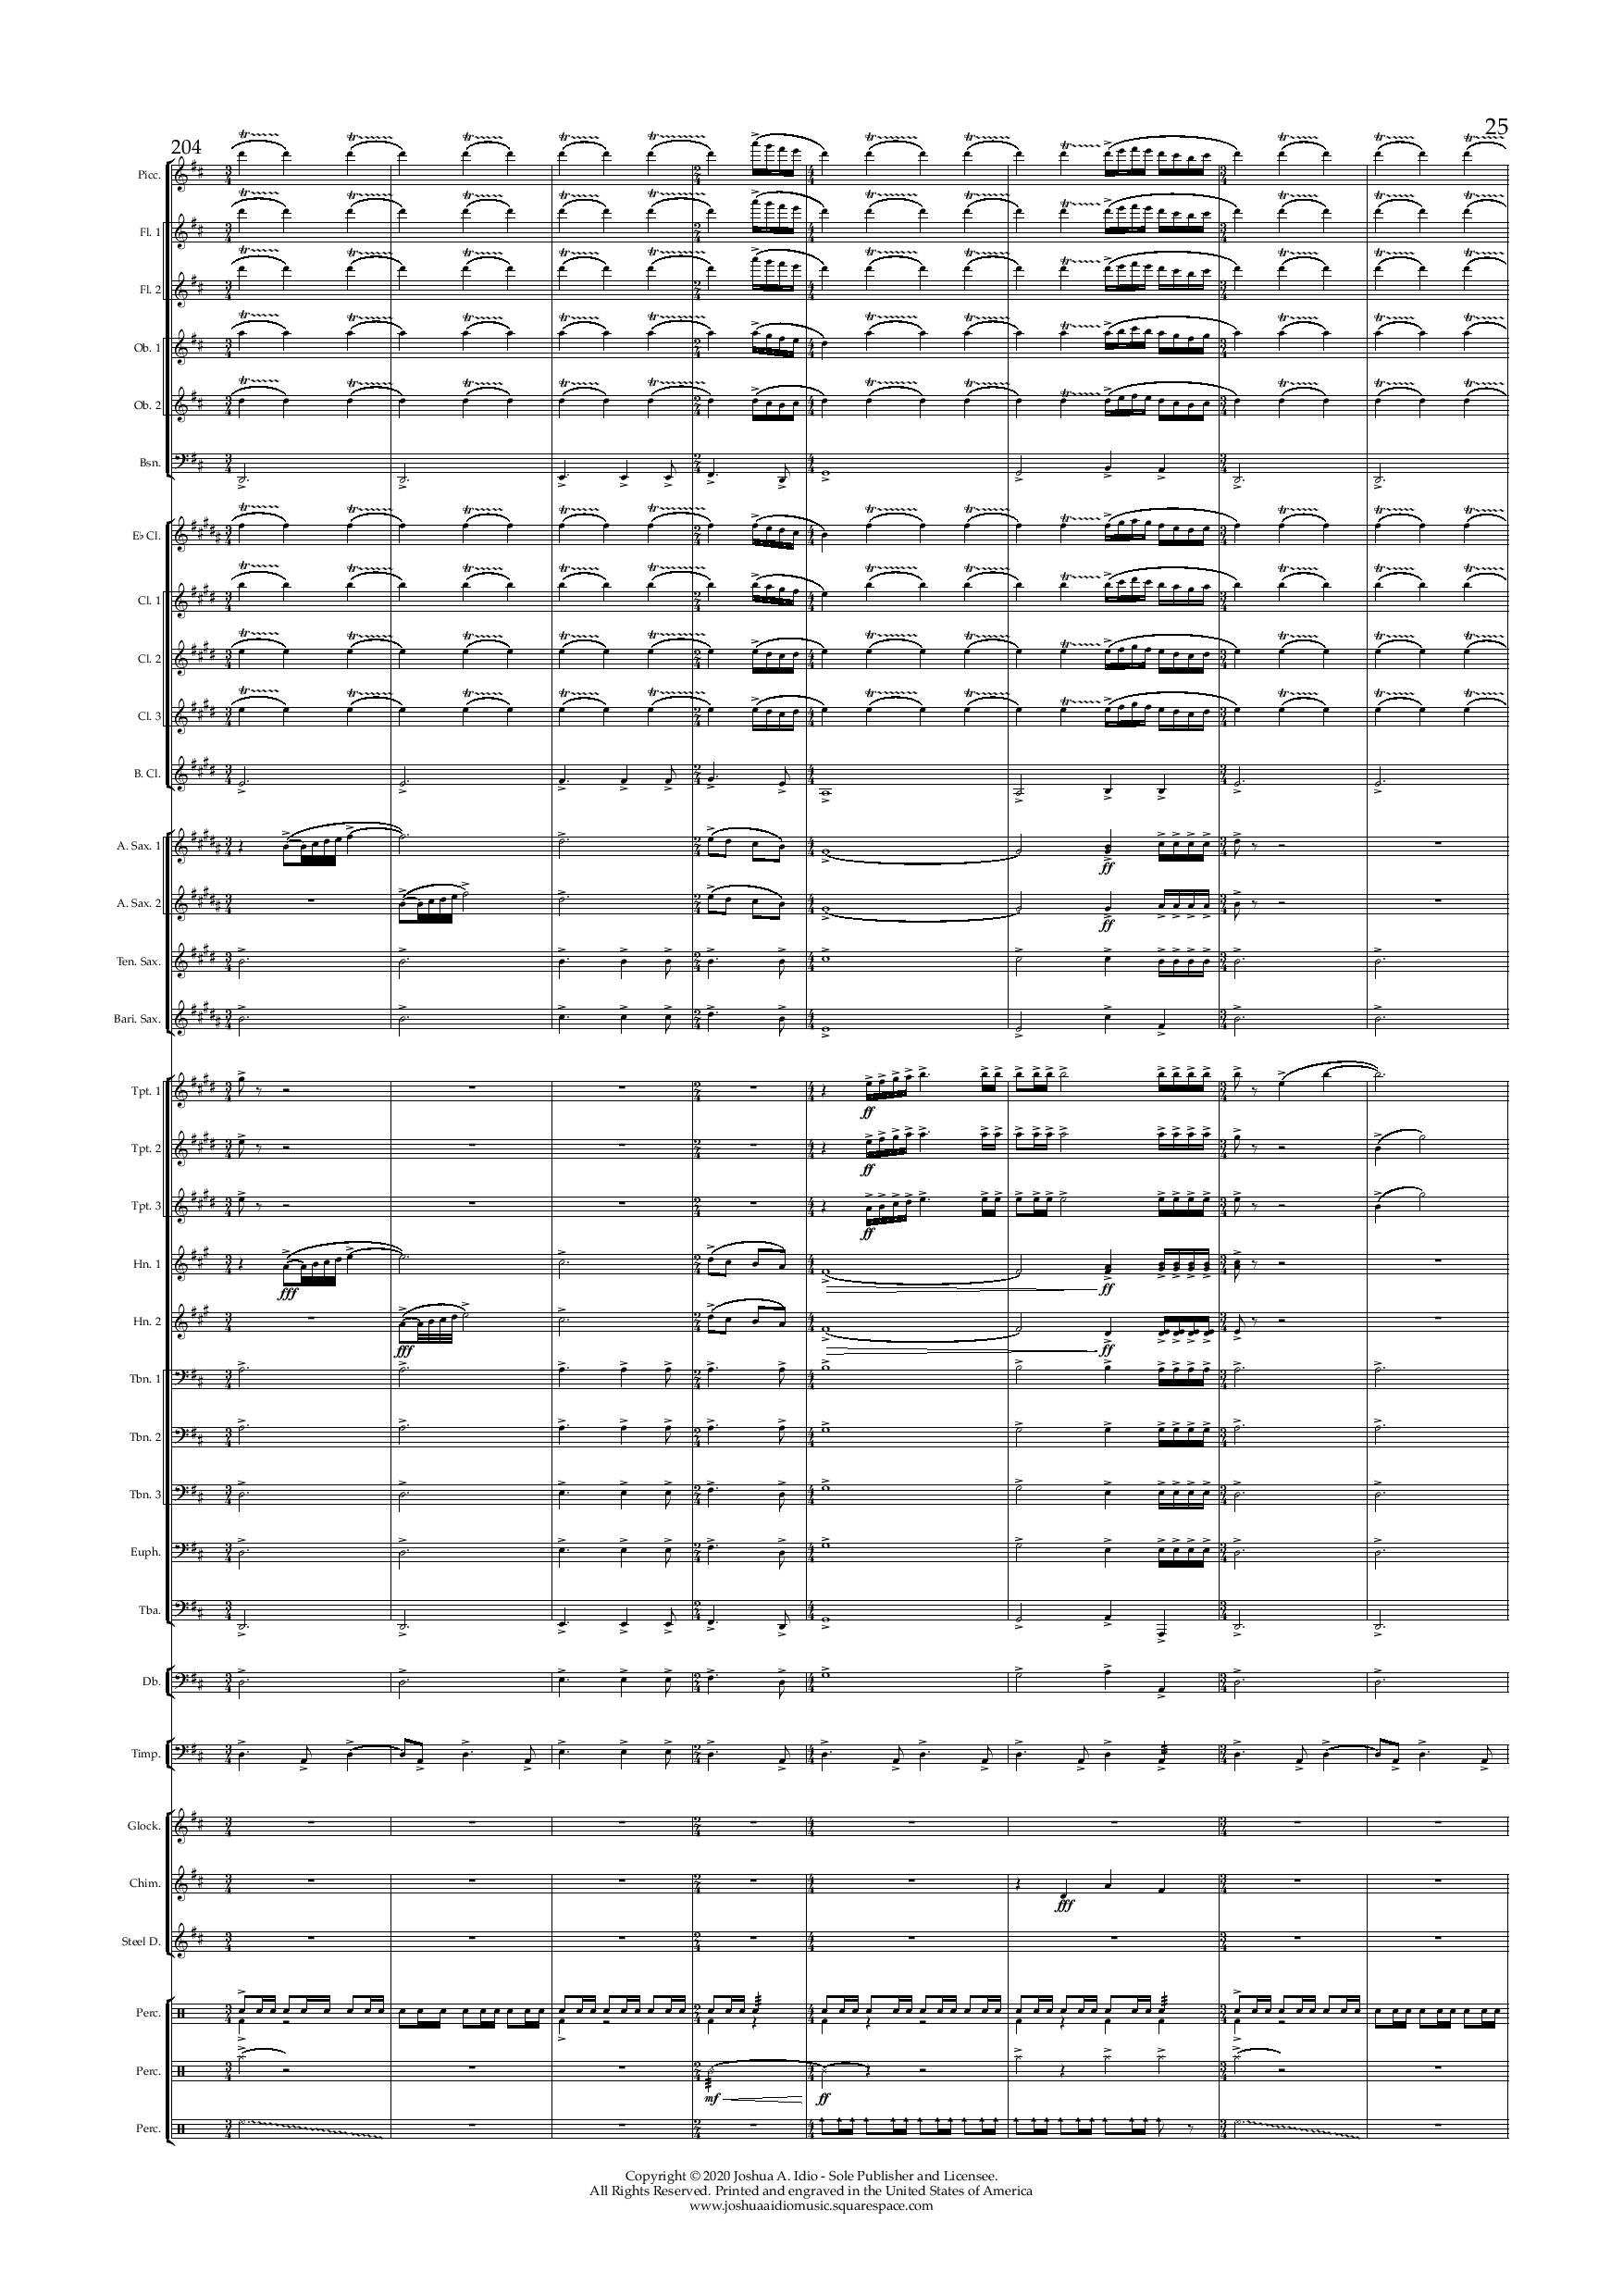 The Cruise Line Dream - Conductor s Score-page-025.jpg